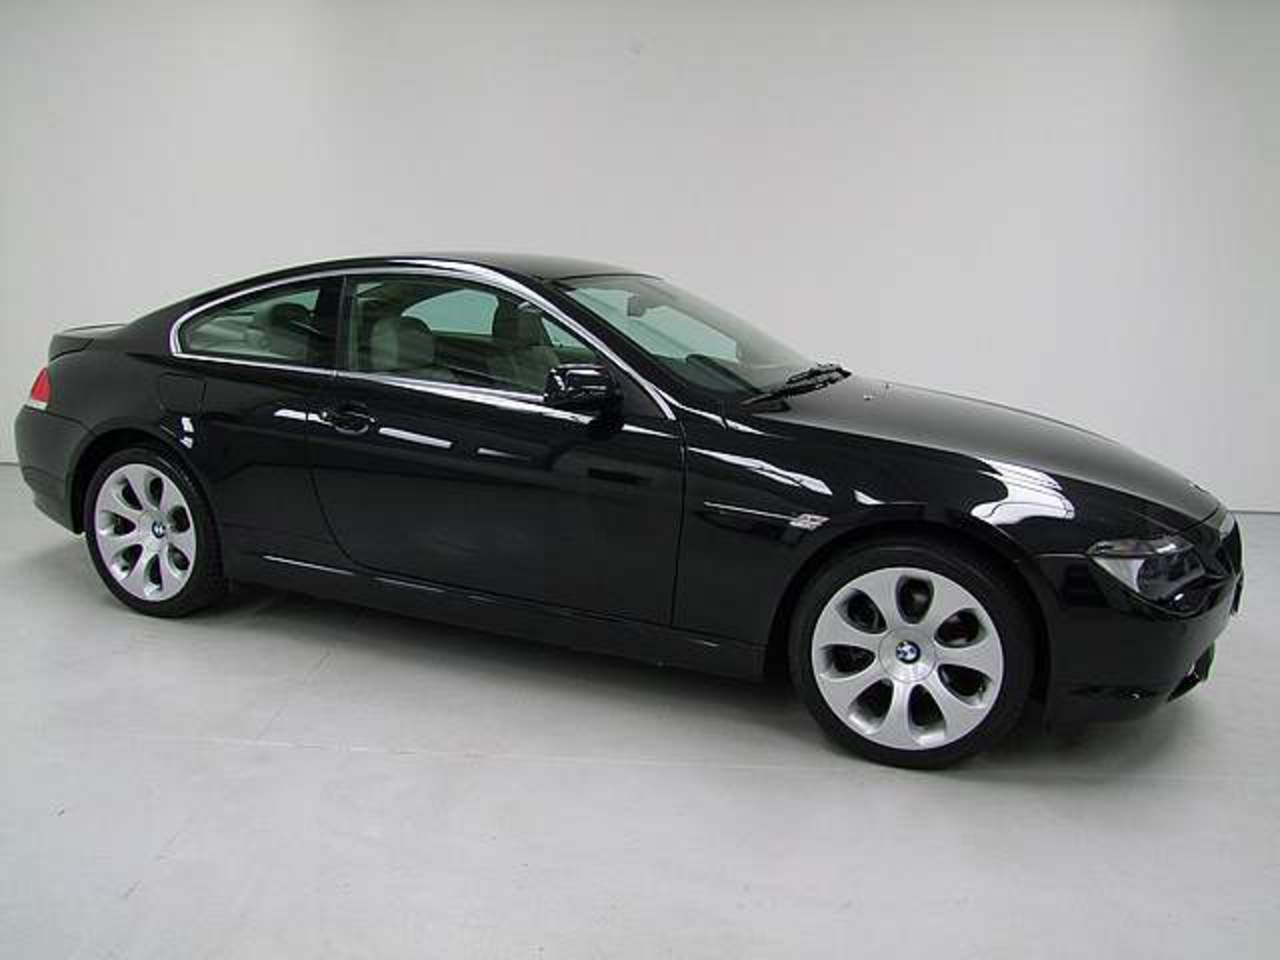 Castellocars > Stock > Car > BMW 630i Coupe - Free Servicing to Dec 11